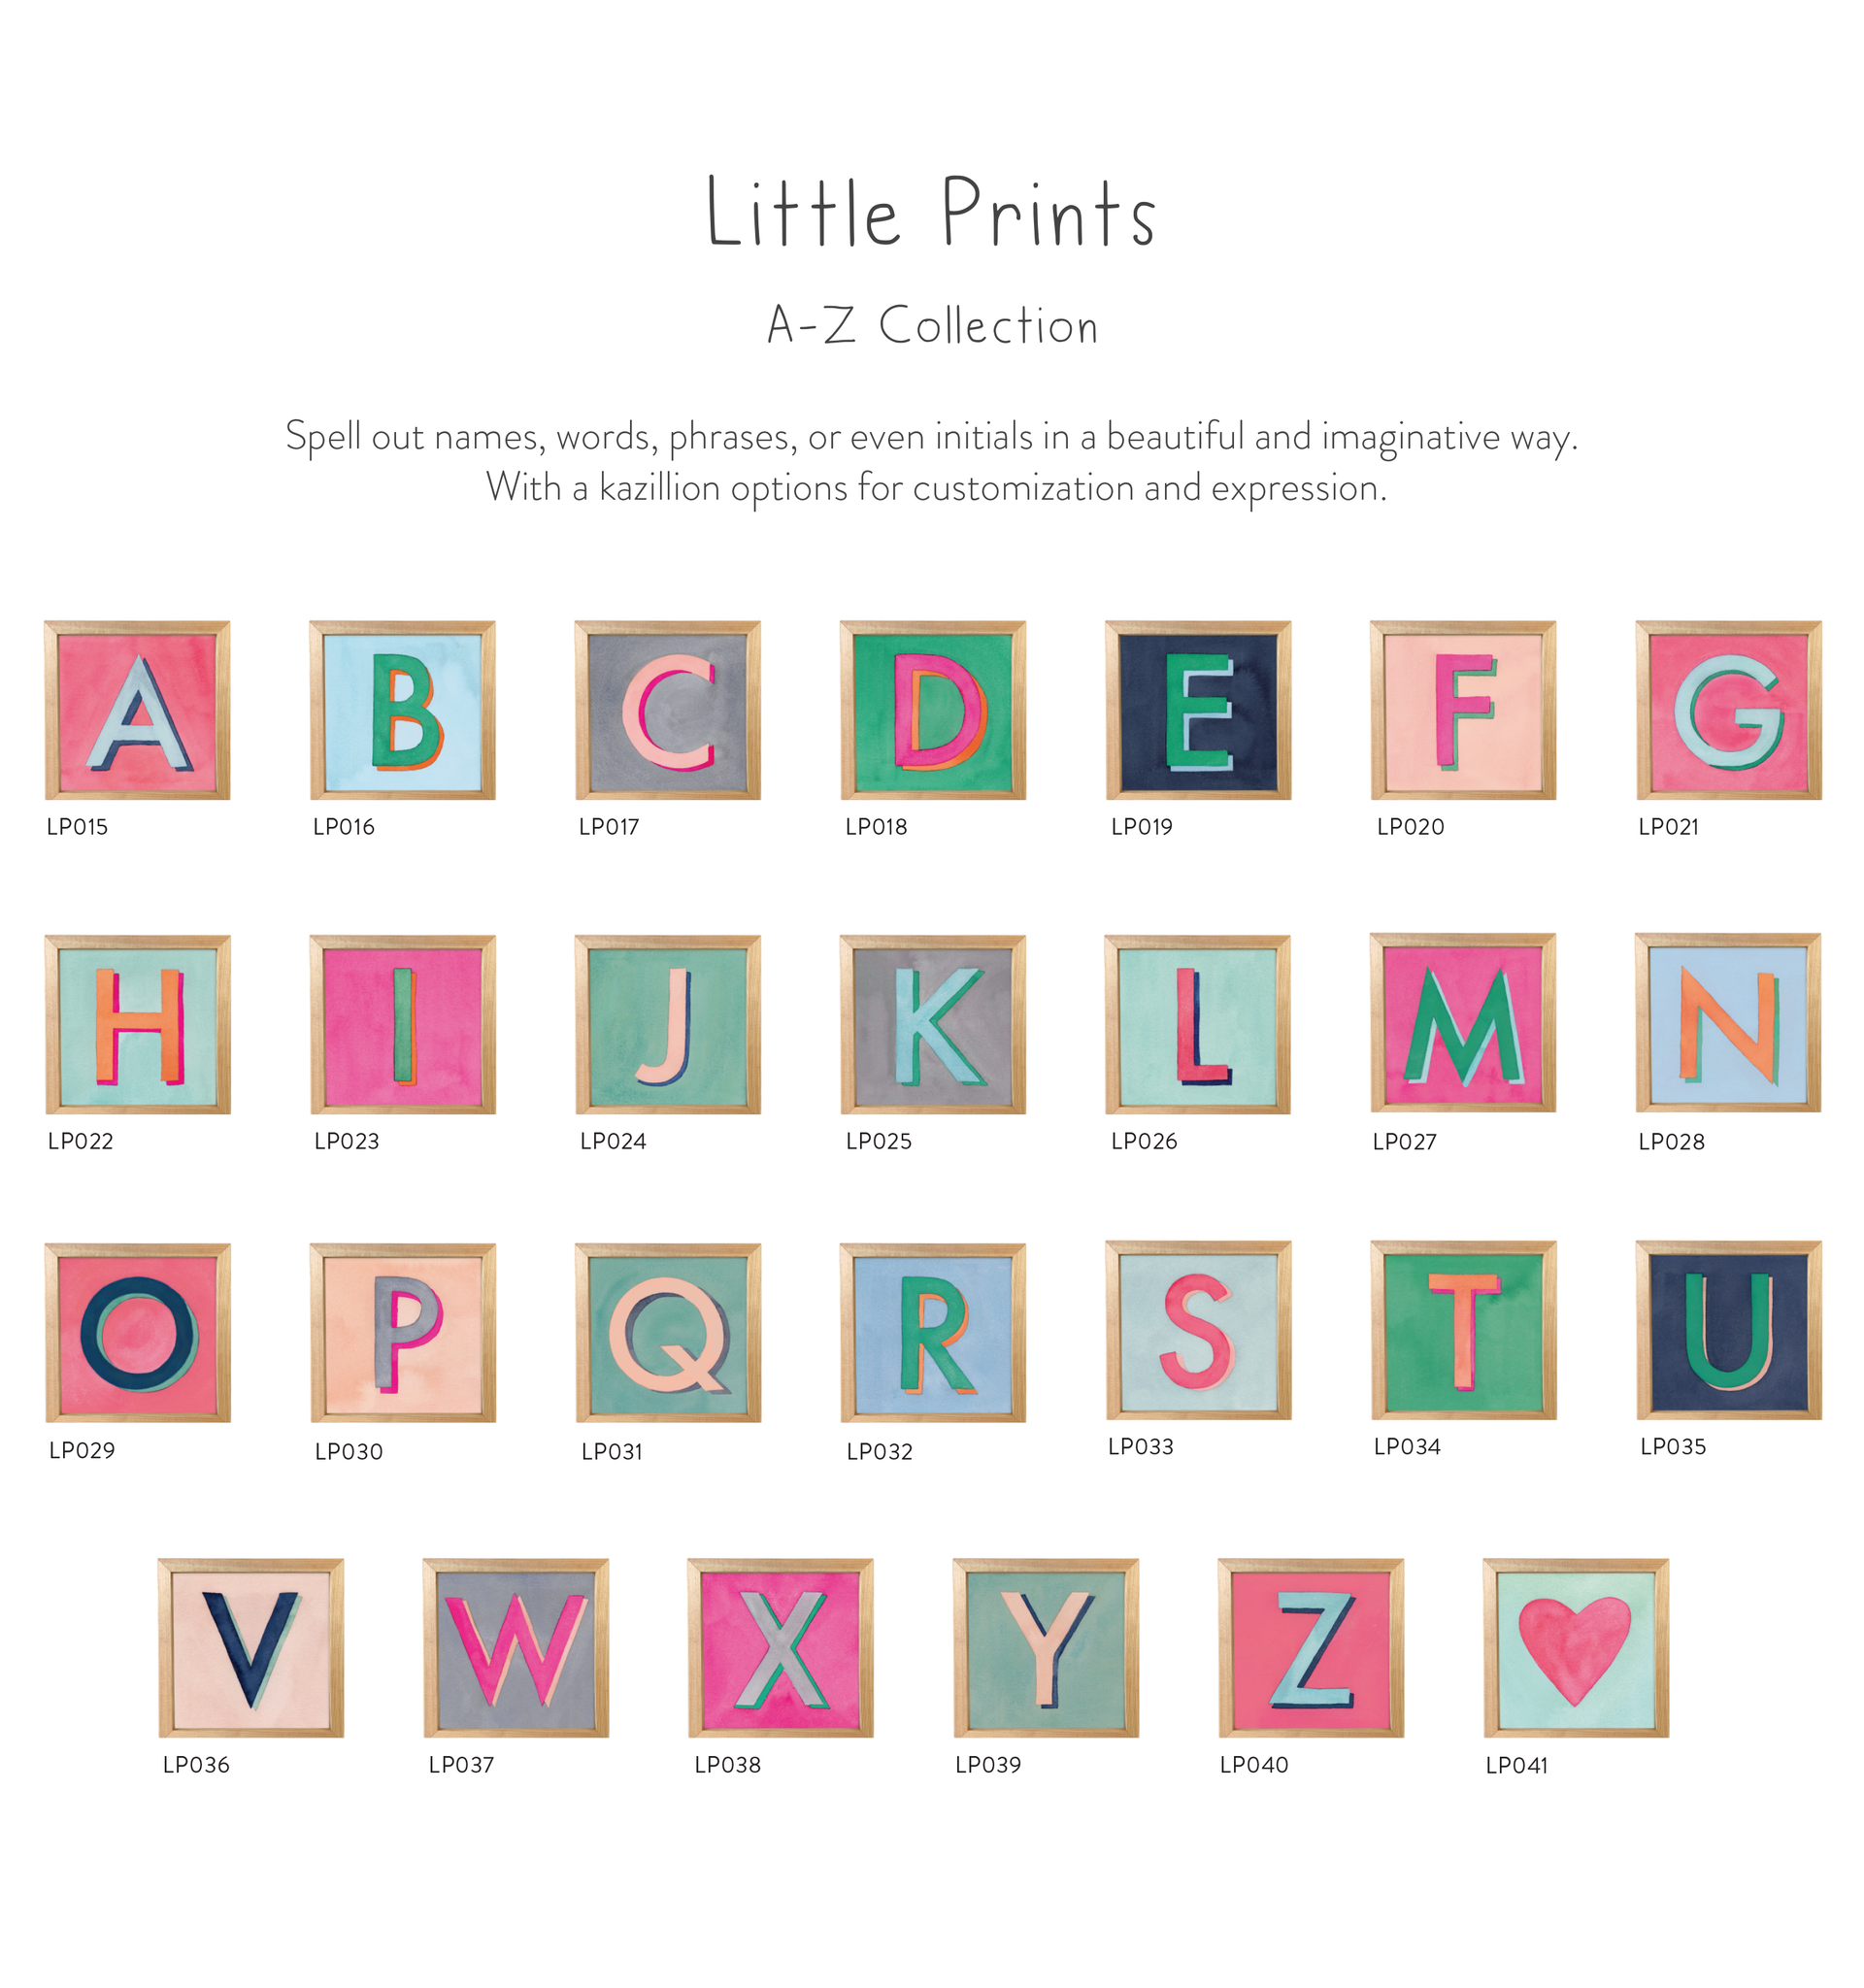 O is for... Little Print